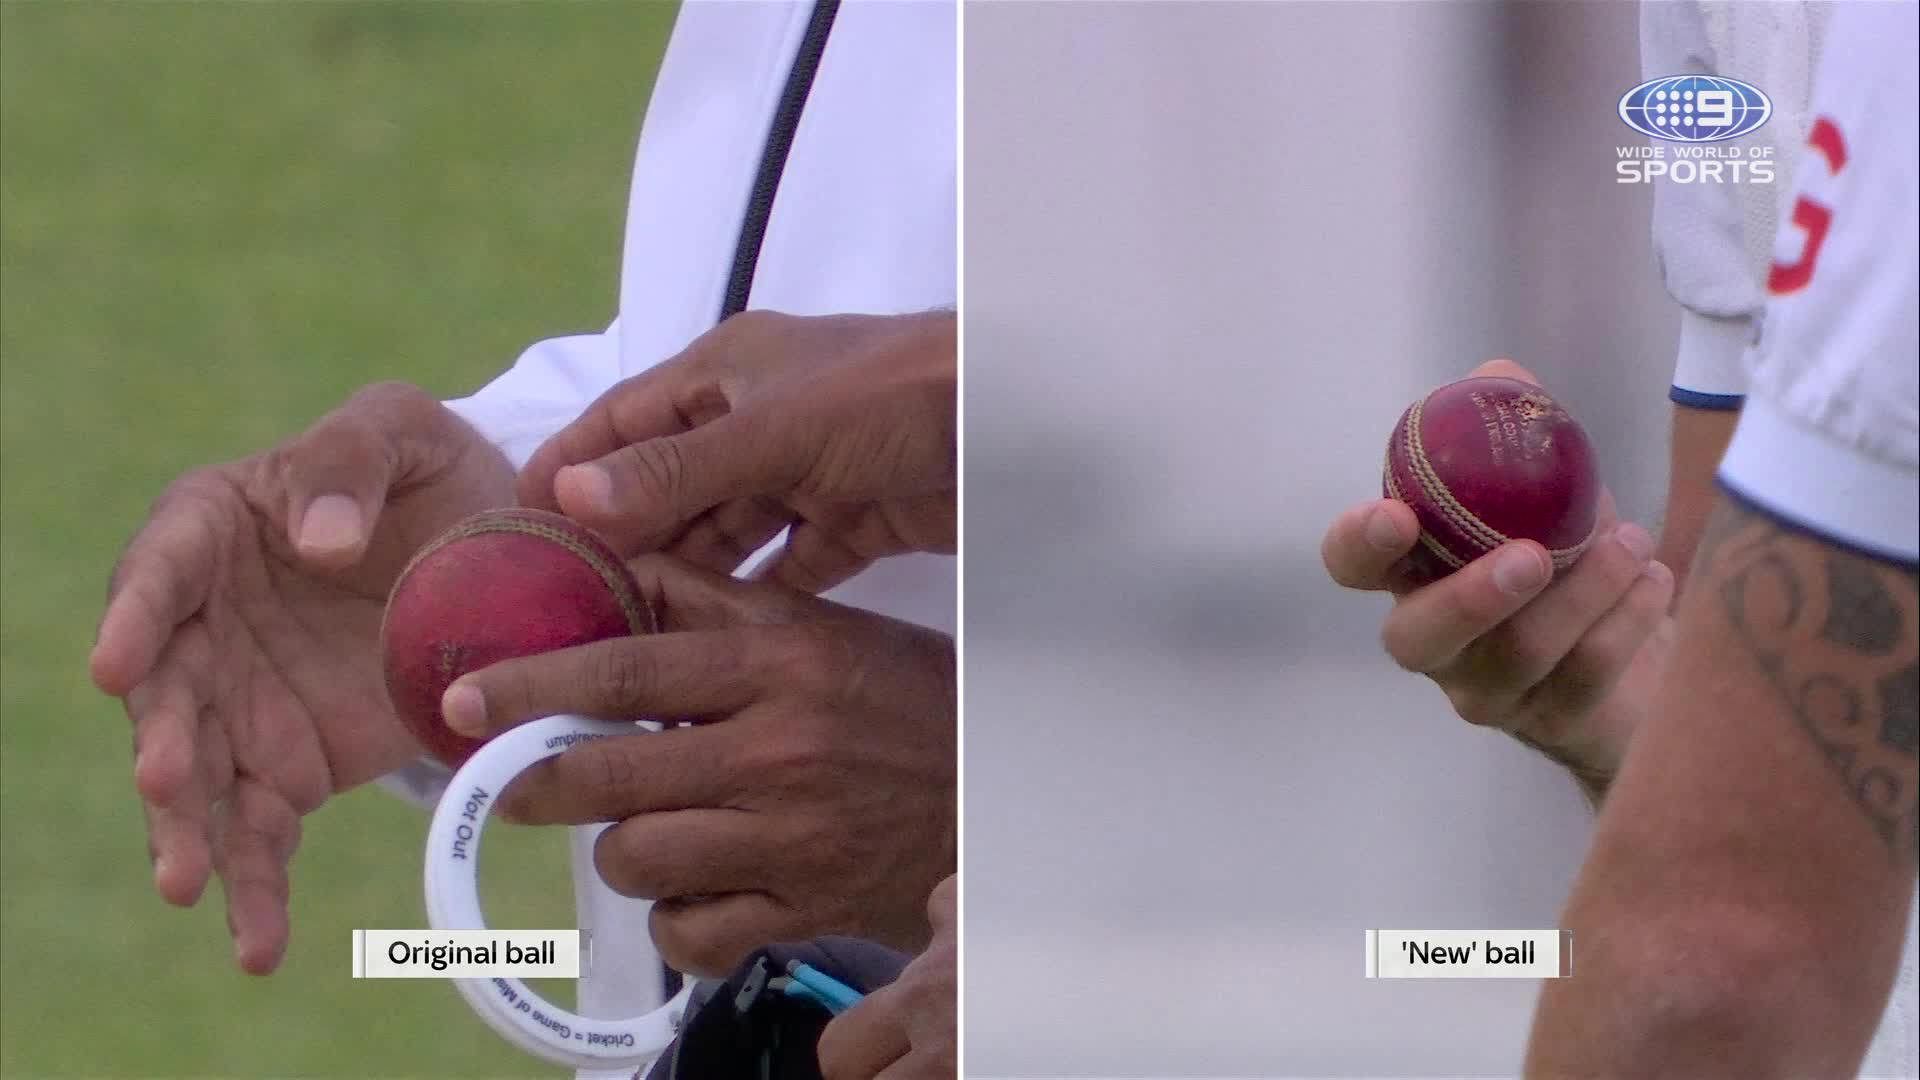 A side-by-side comparison of the original ball and its replacement.